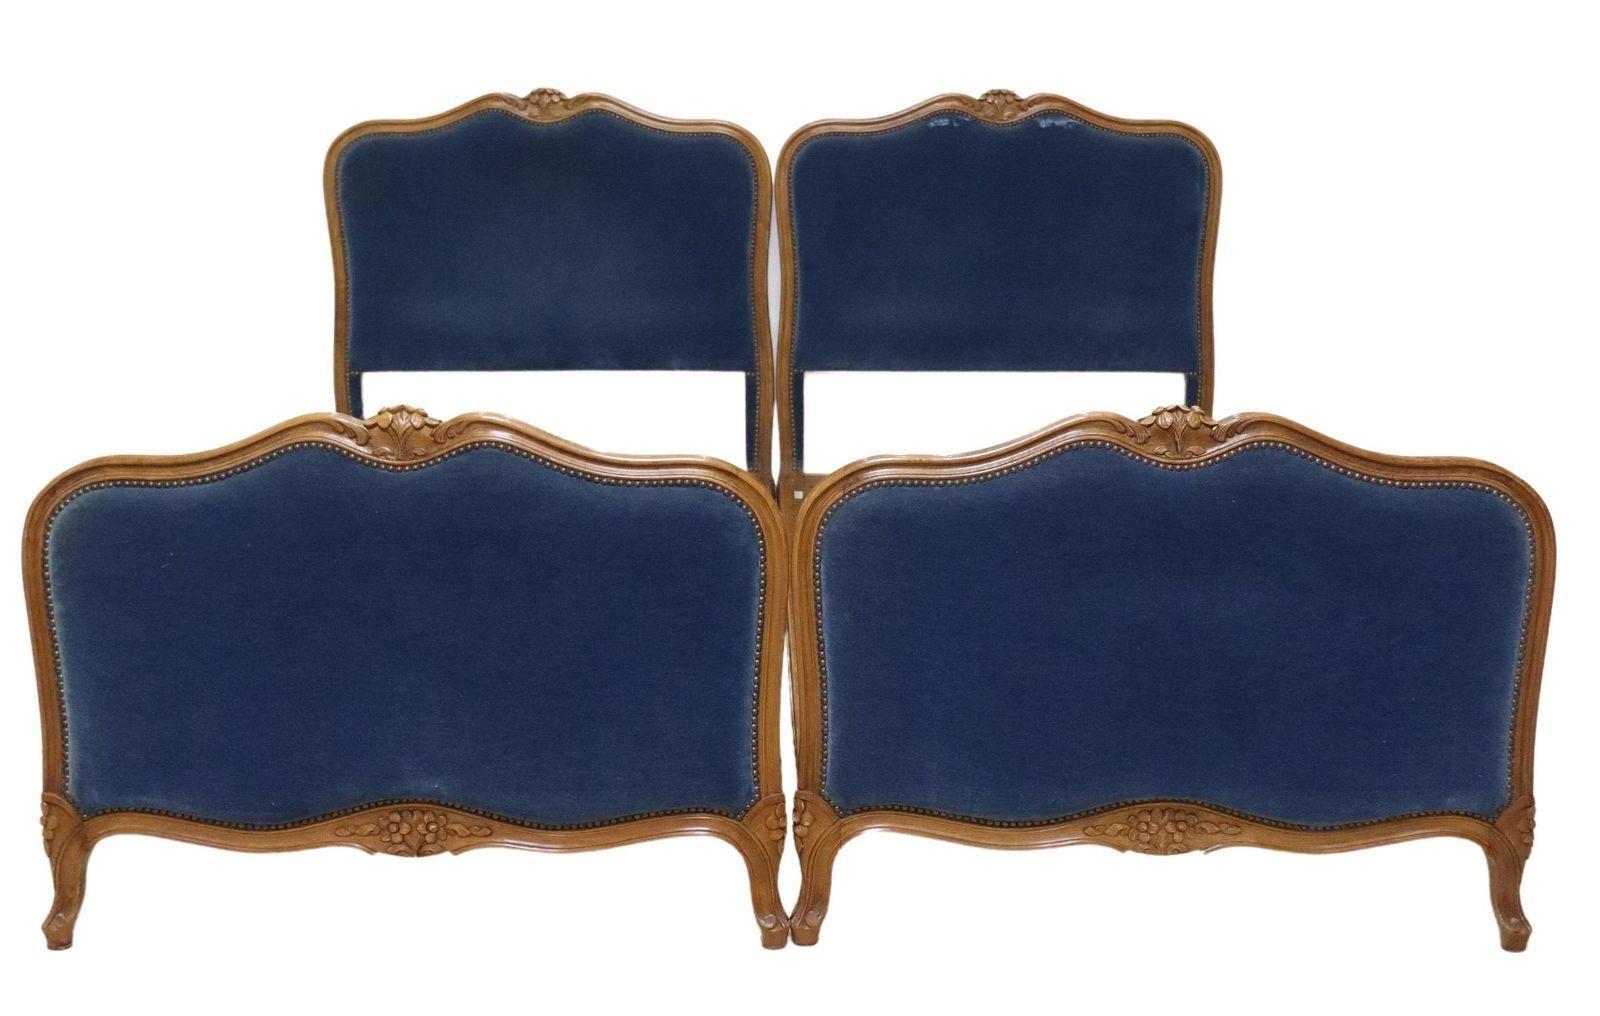 Hand-Crafted Antique French Louis XV Style Blue Velvet Upholstered Twin Beds, a Pair For Sale